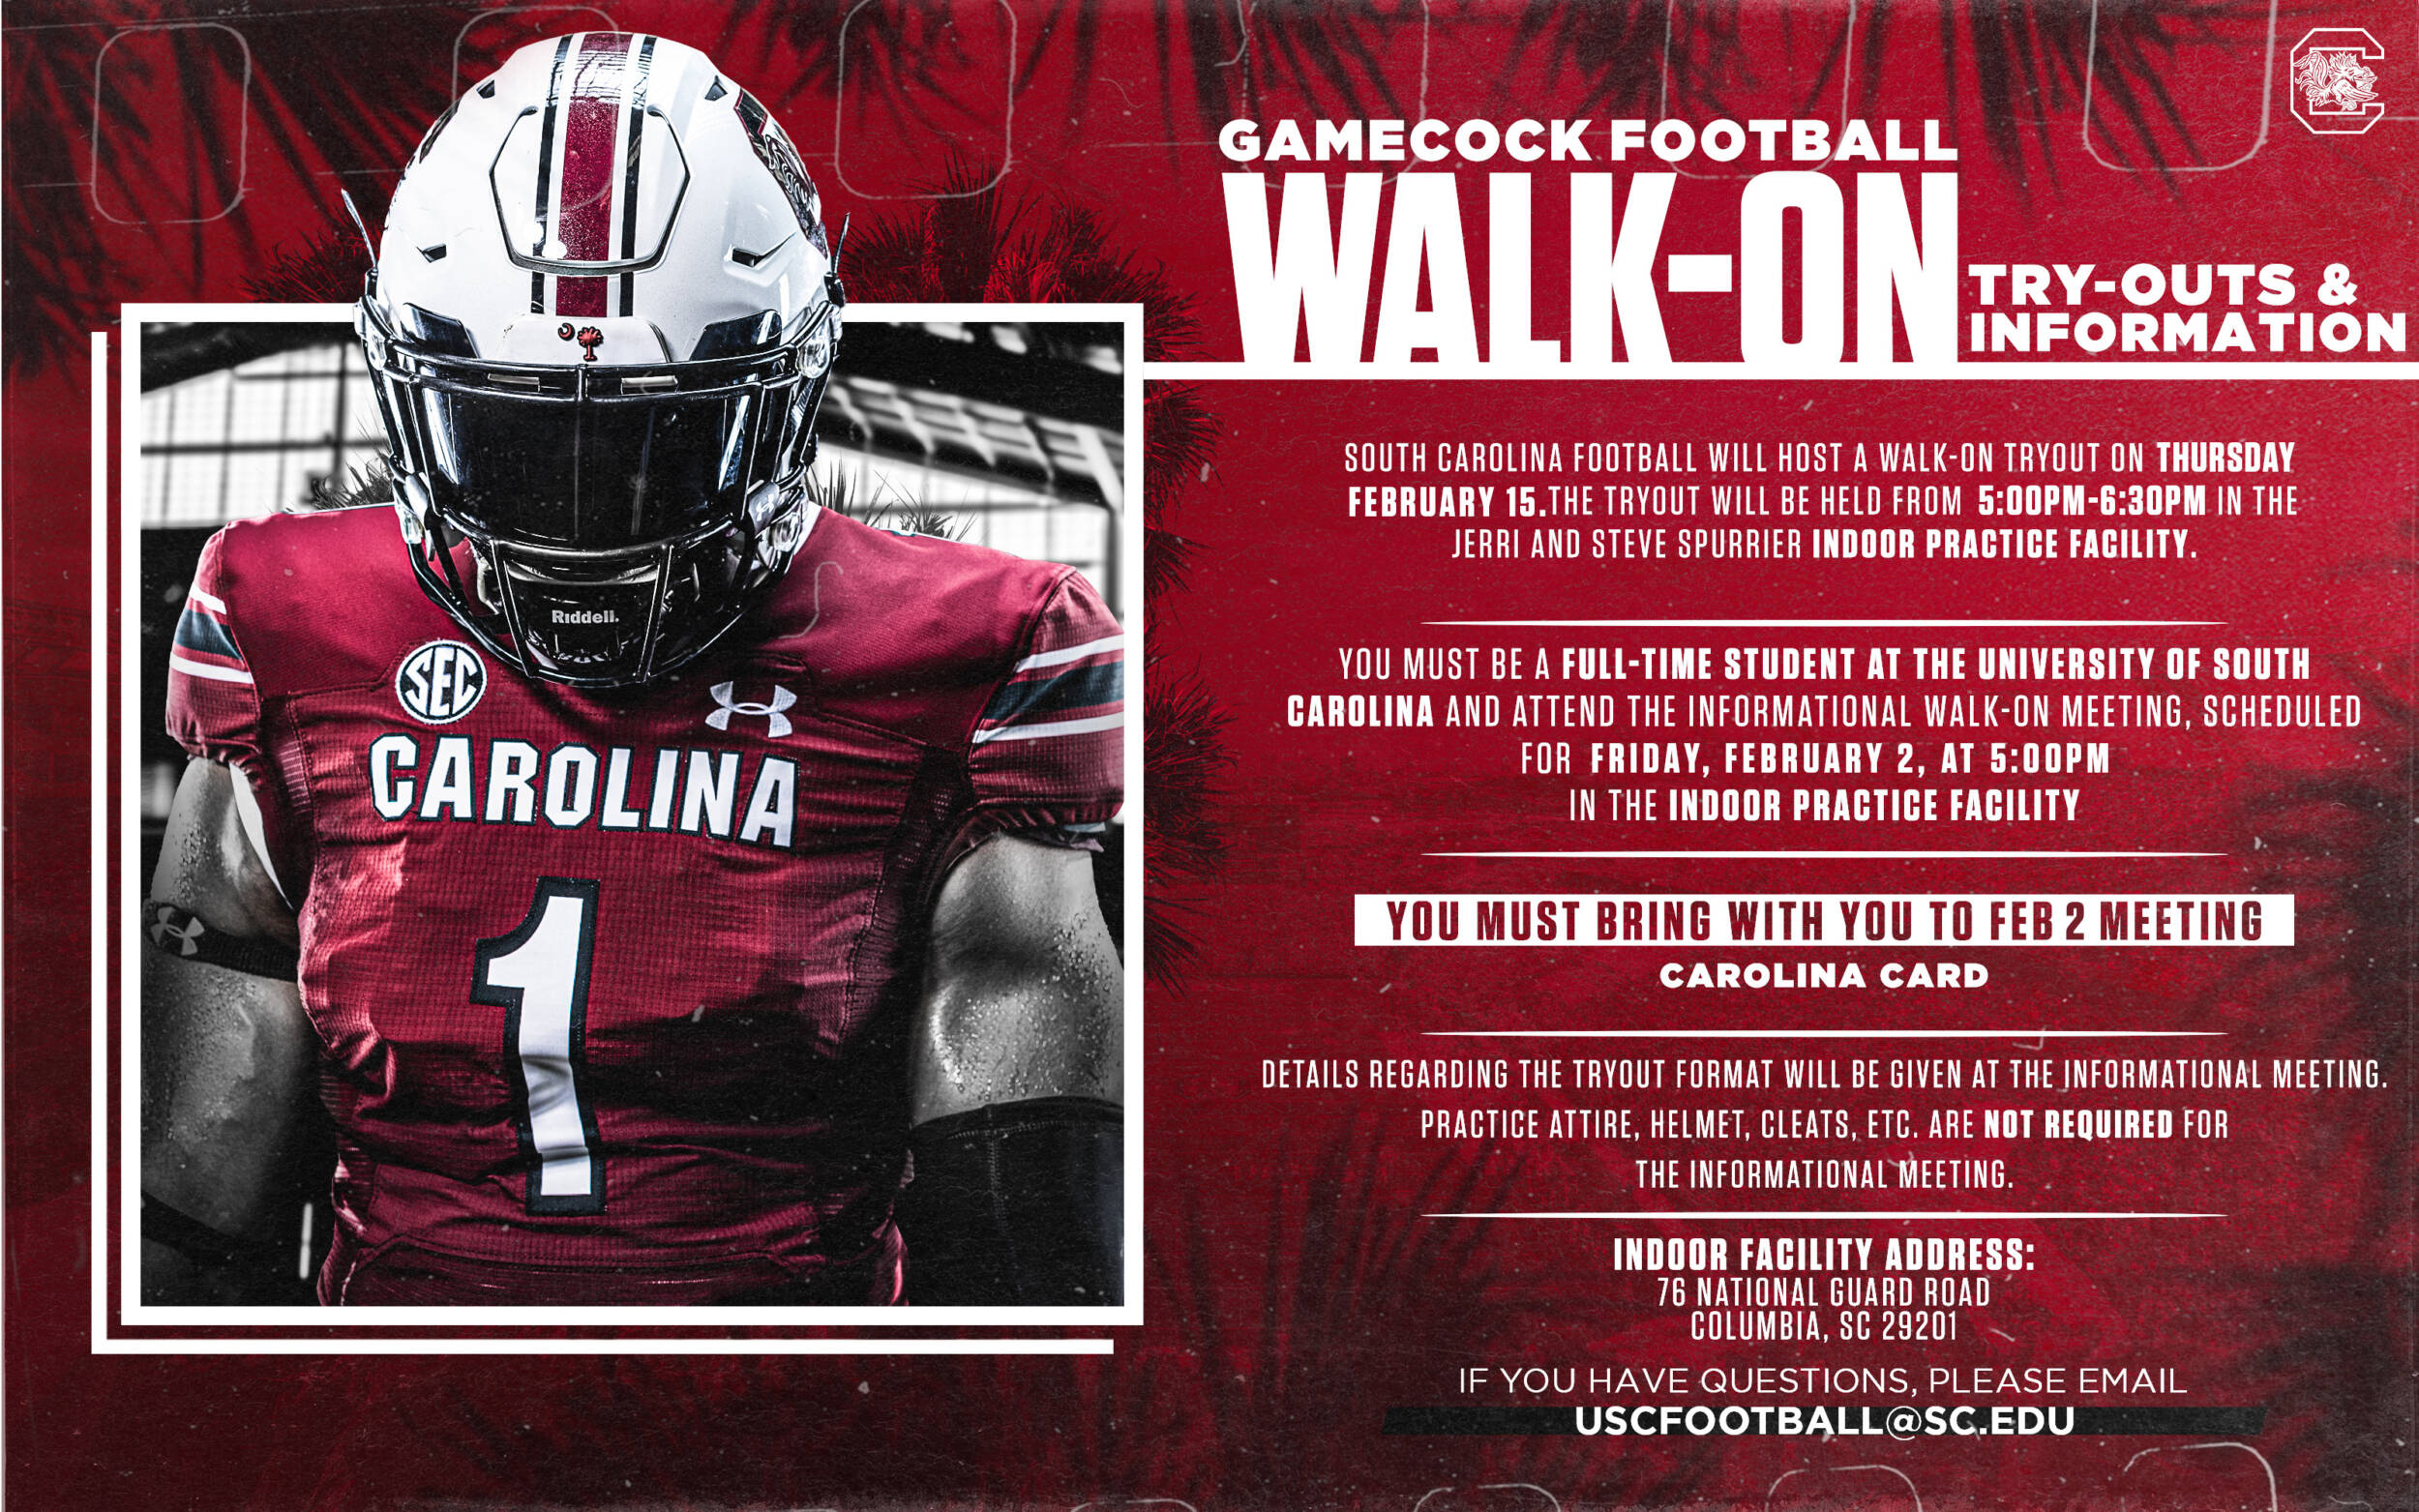 Football Walk-on Tryout Scheduled